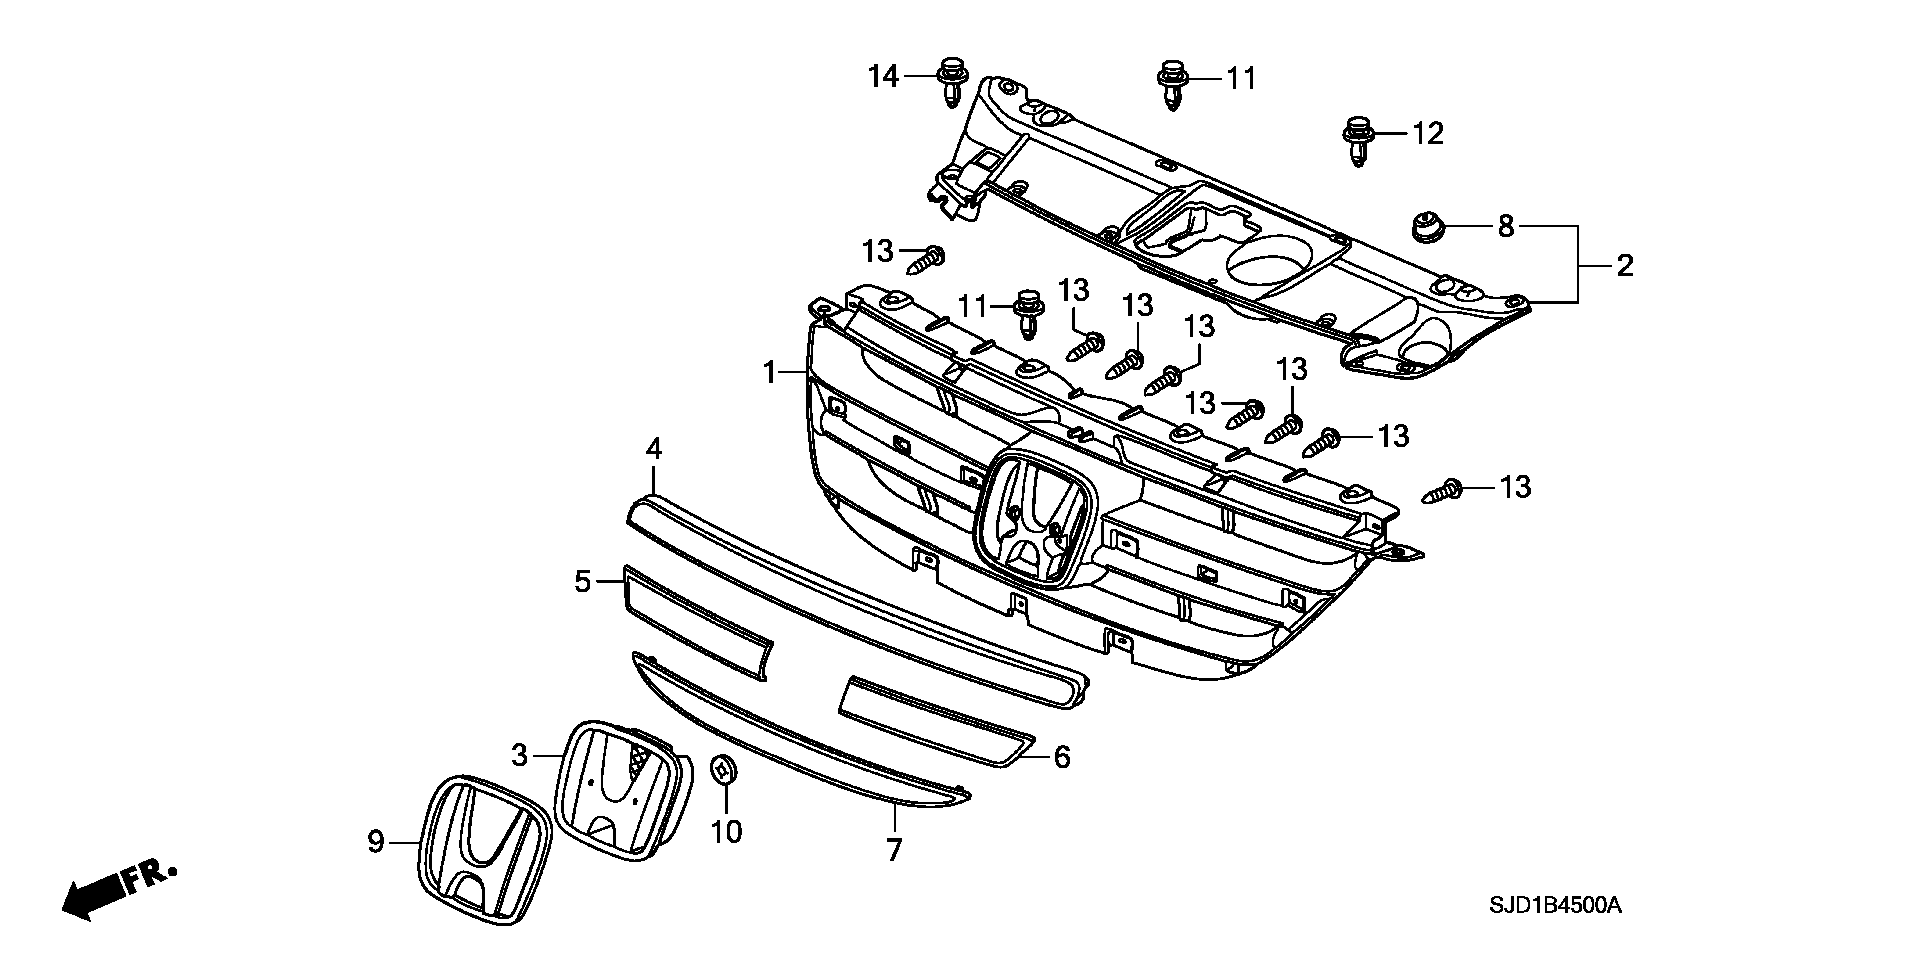 FRONT GRILLE(1)